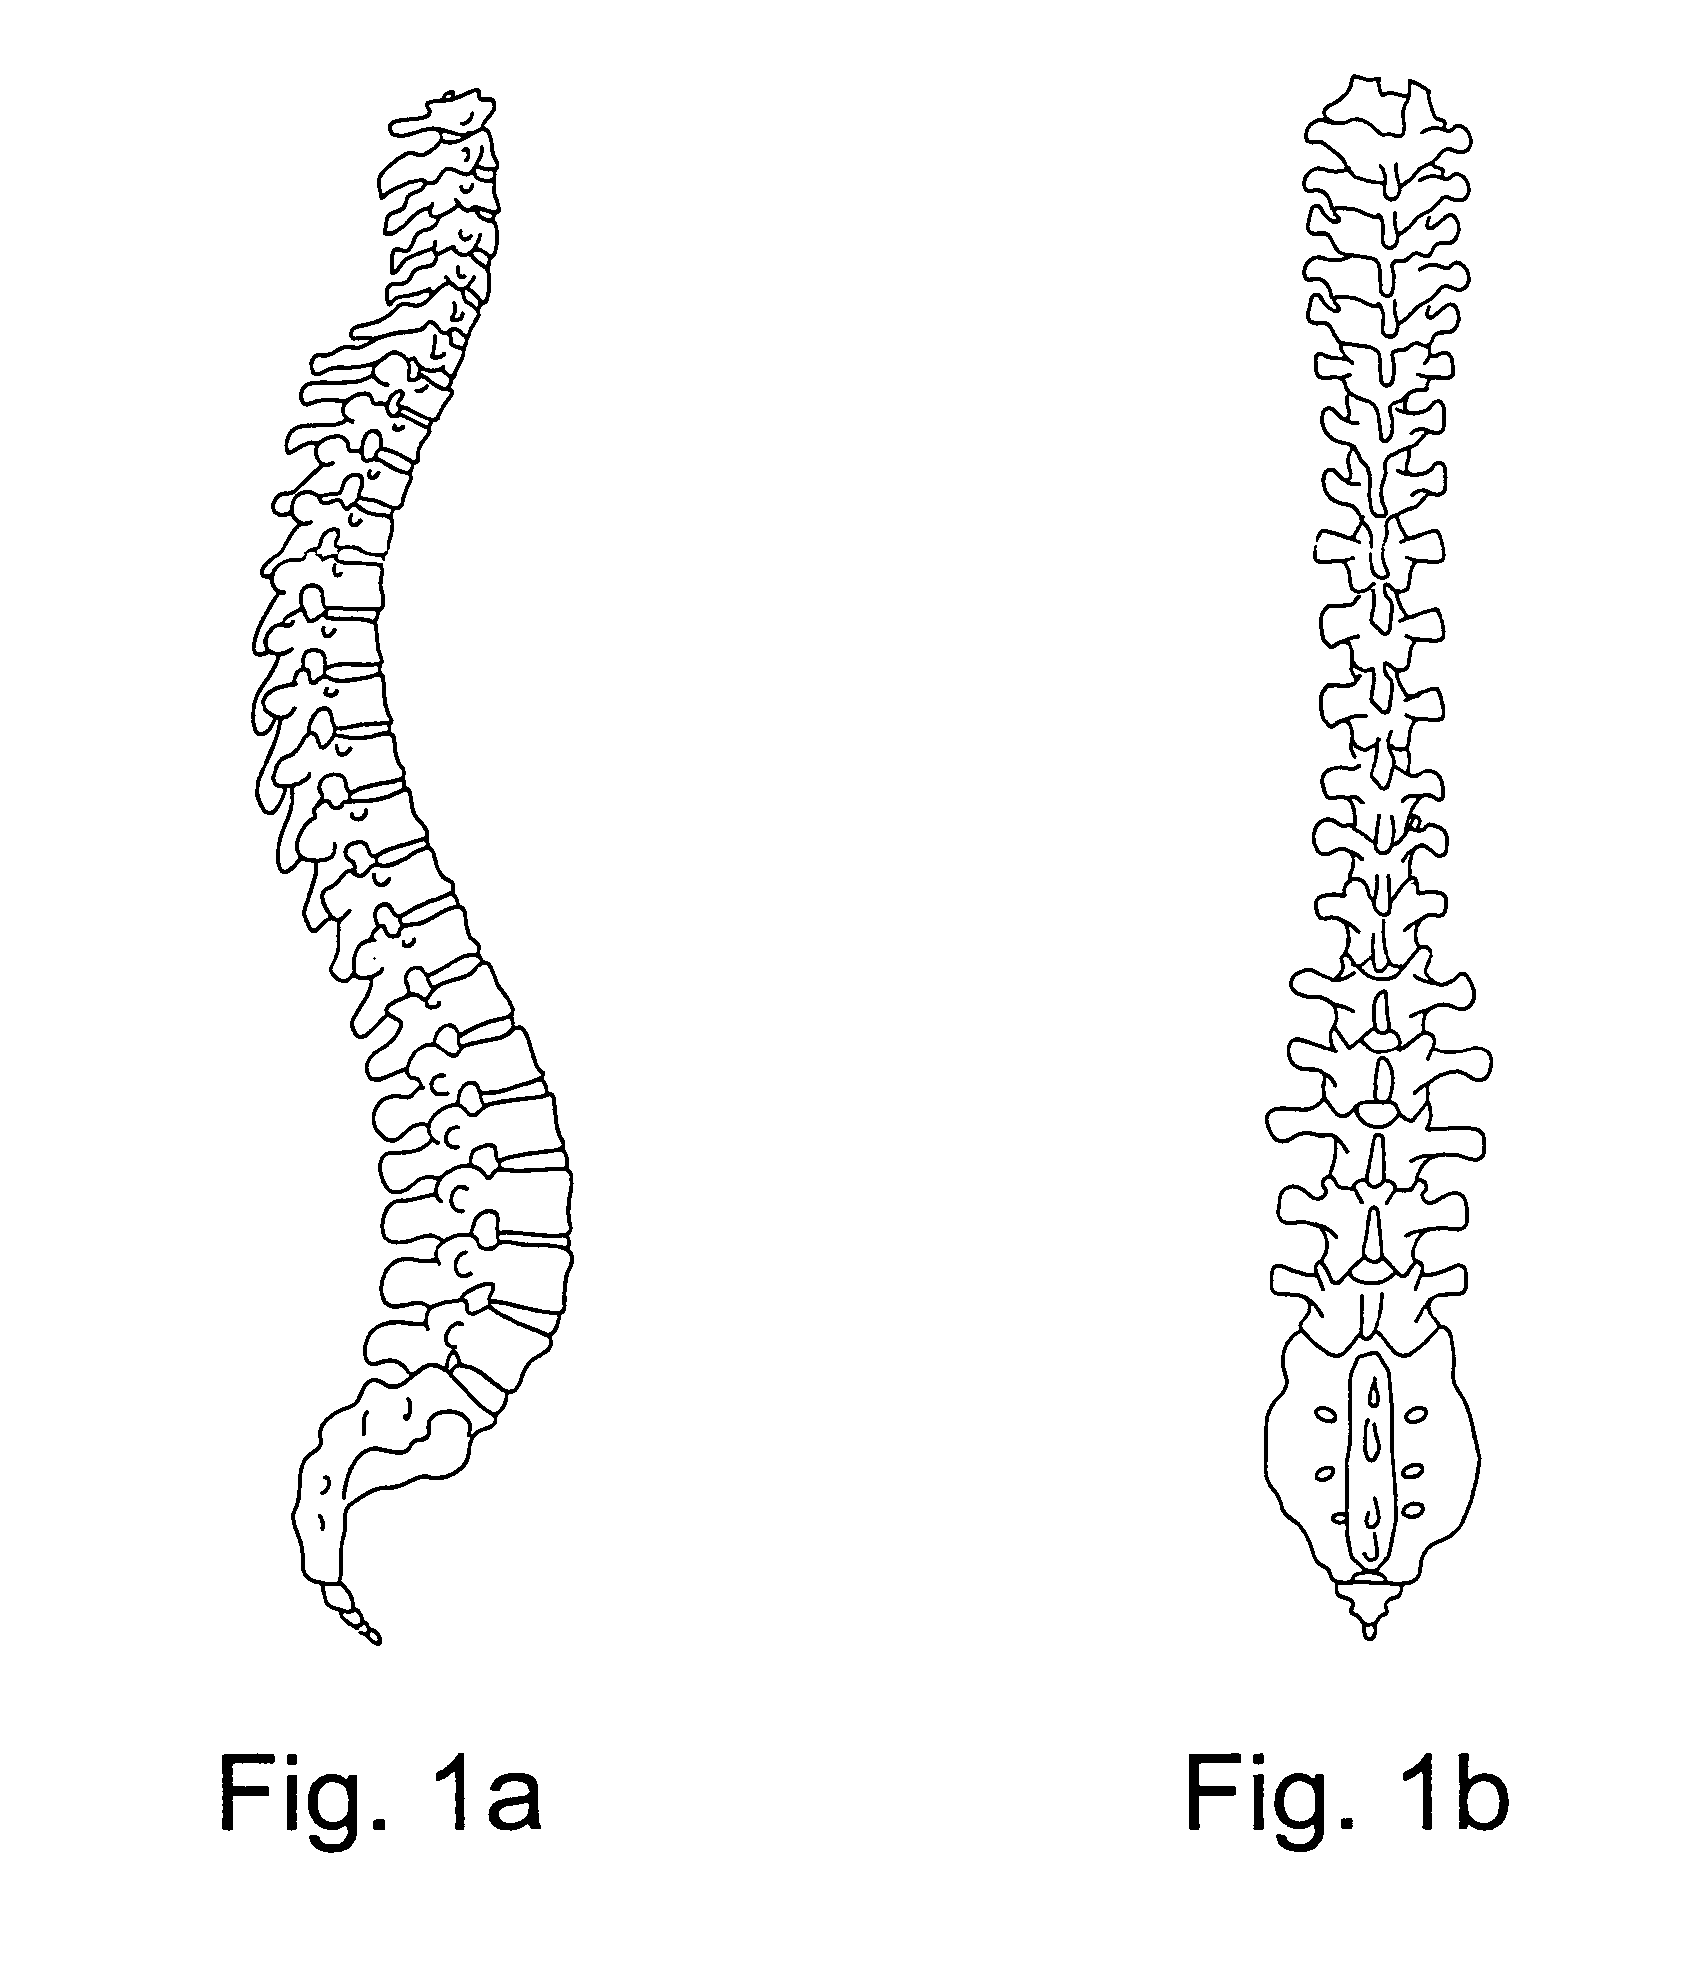 Method of improving pedicle screw placement in spinal surgery